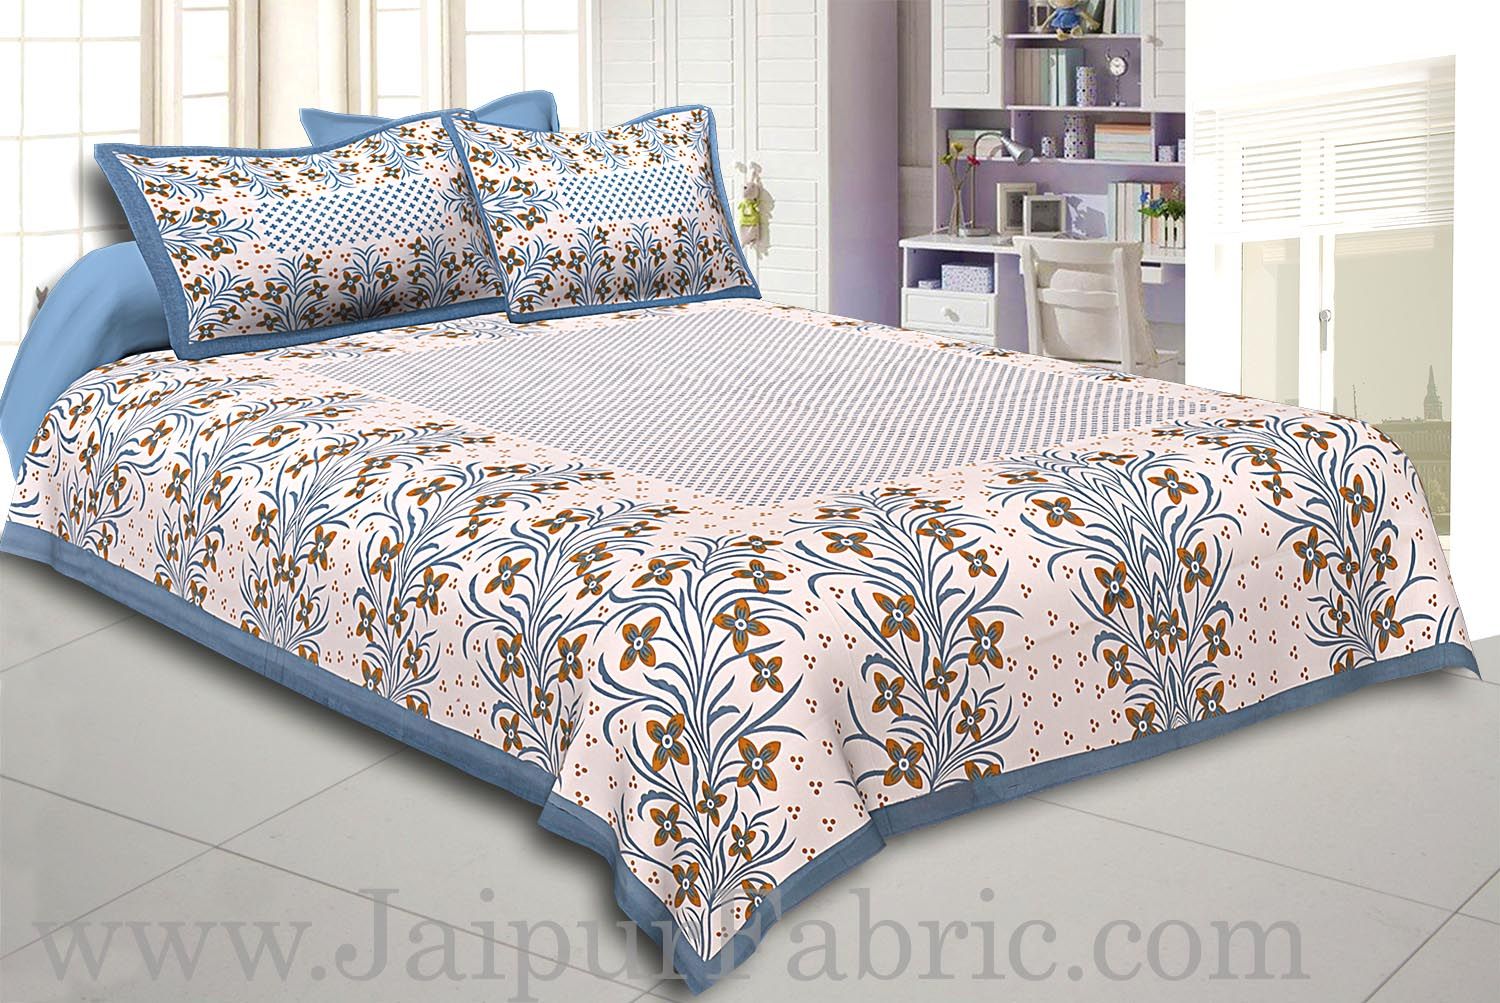 COMBO45- Set of 1 Double Bedsheet and  1 Single Bedsheet With  2+1 Pillow Cover